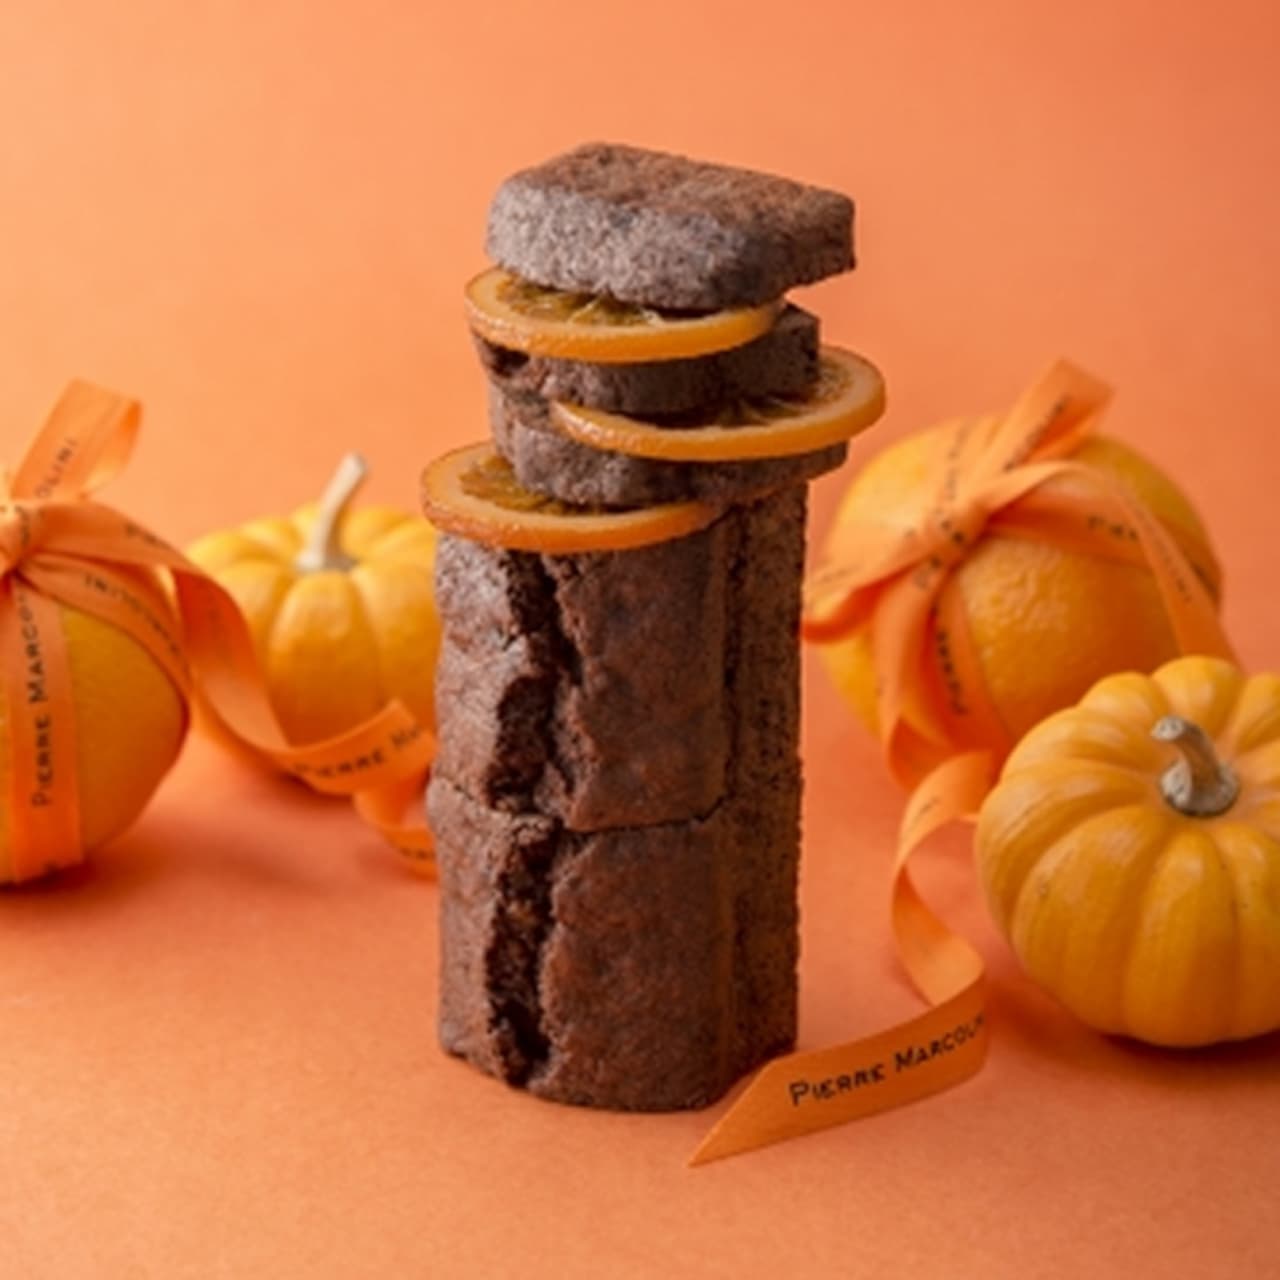 Halloween limited "orange chocolate cake" for Pierre Marcolini